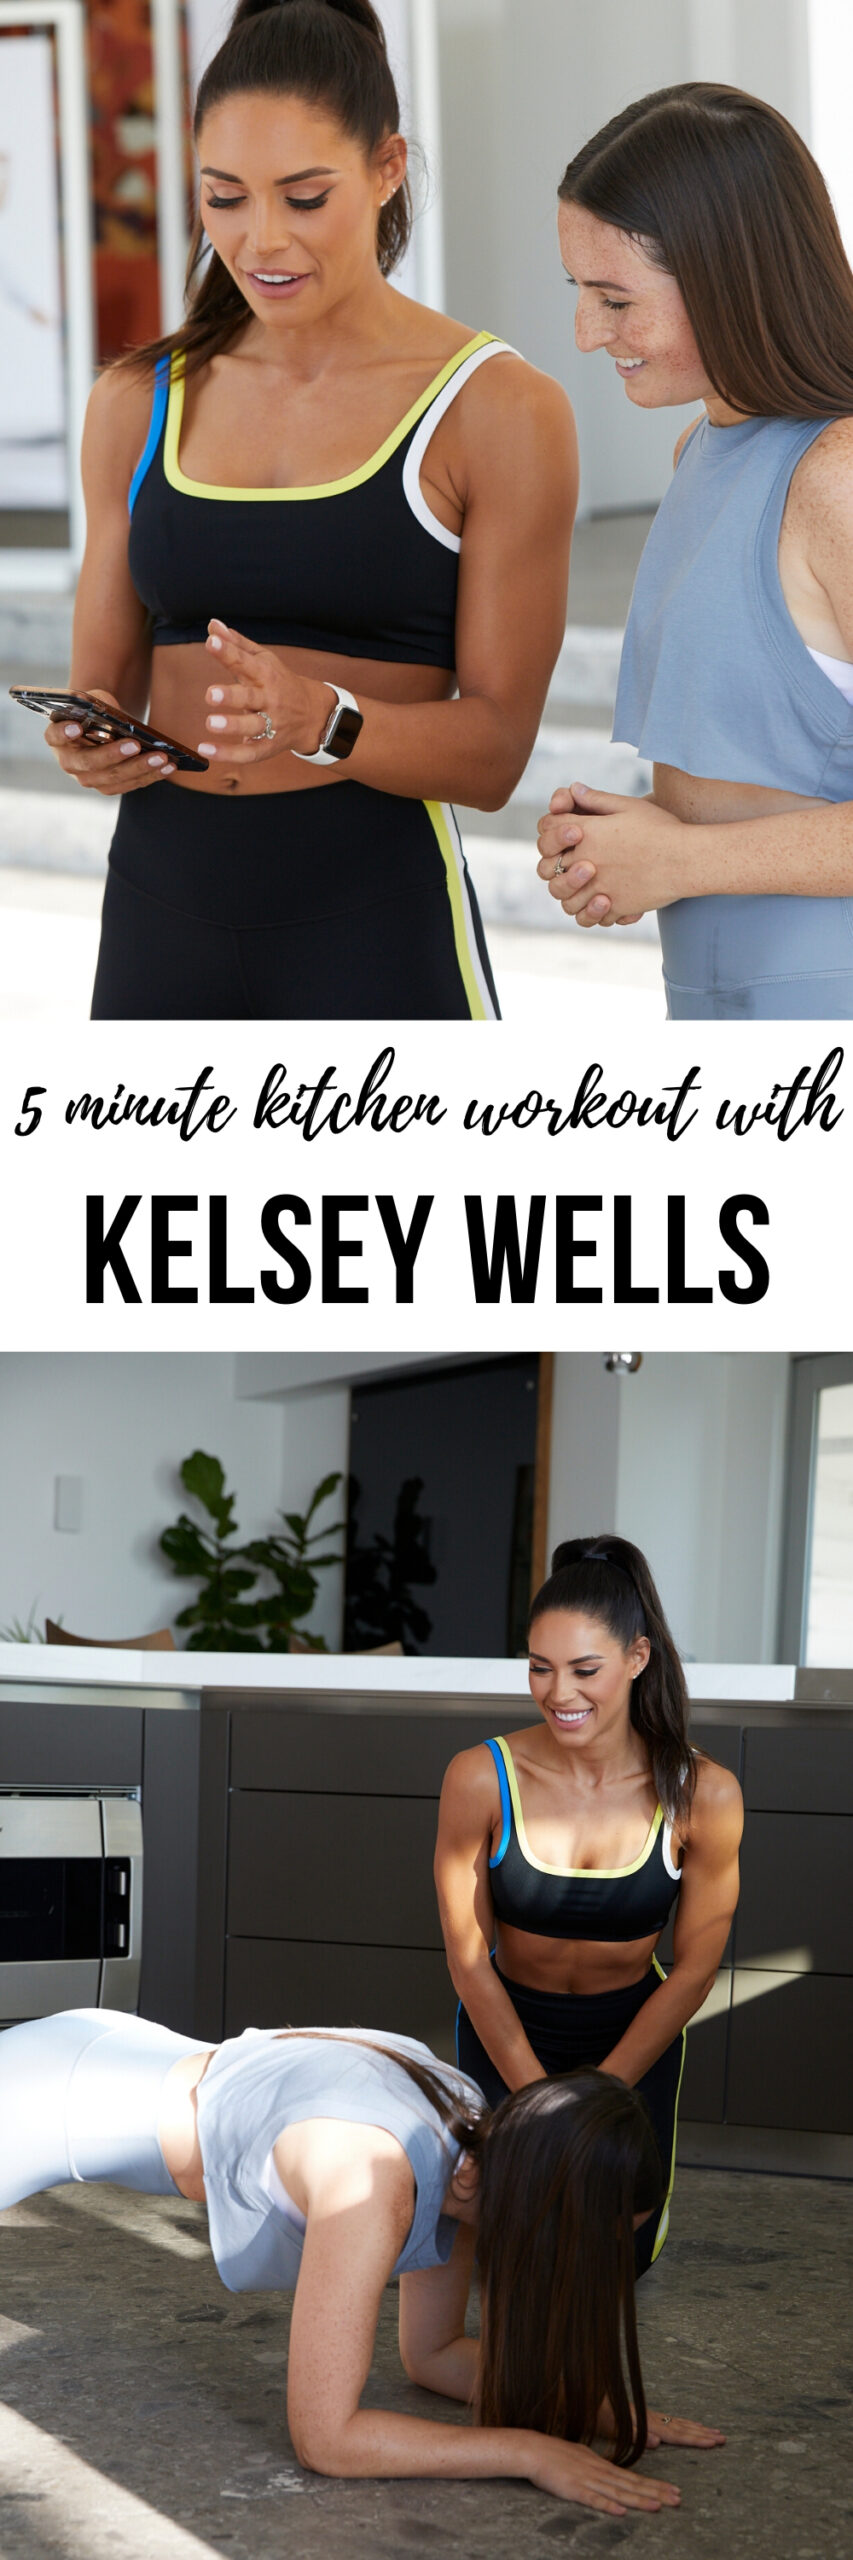 kitchen workout with kelsey wells